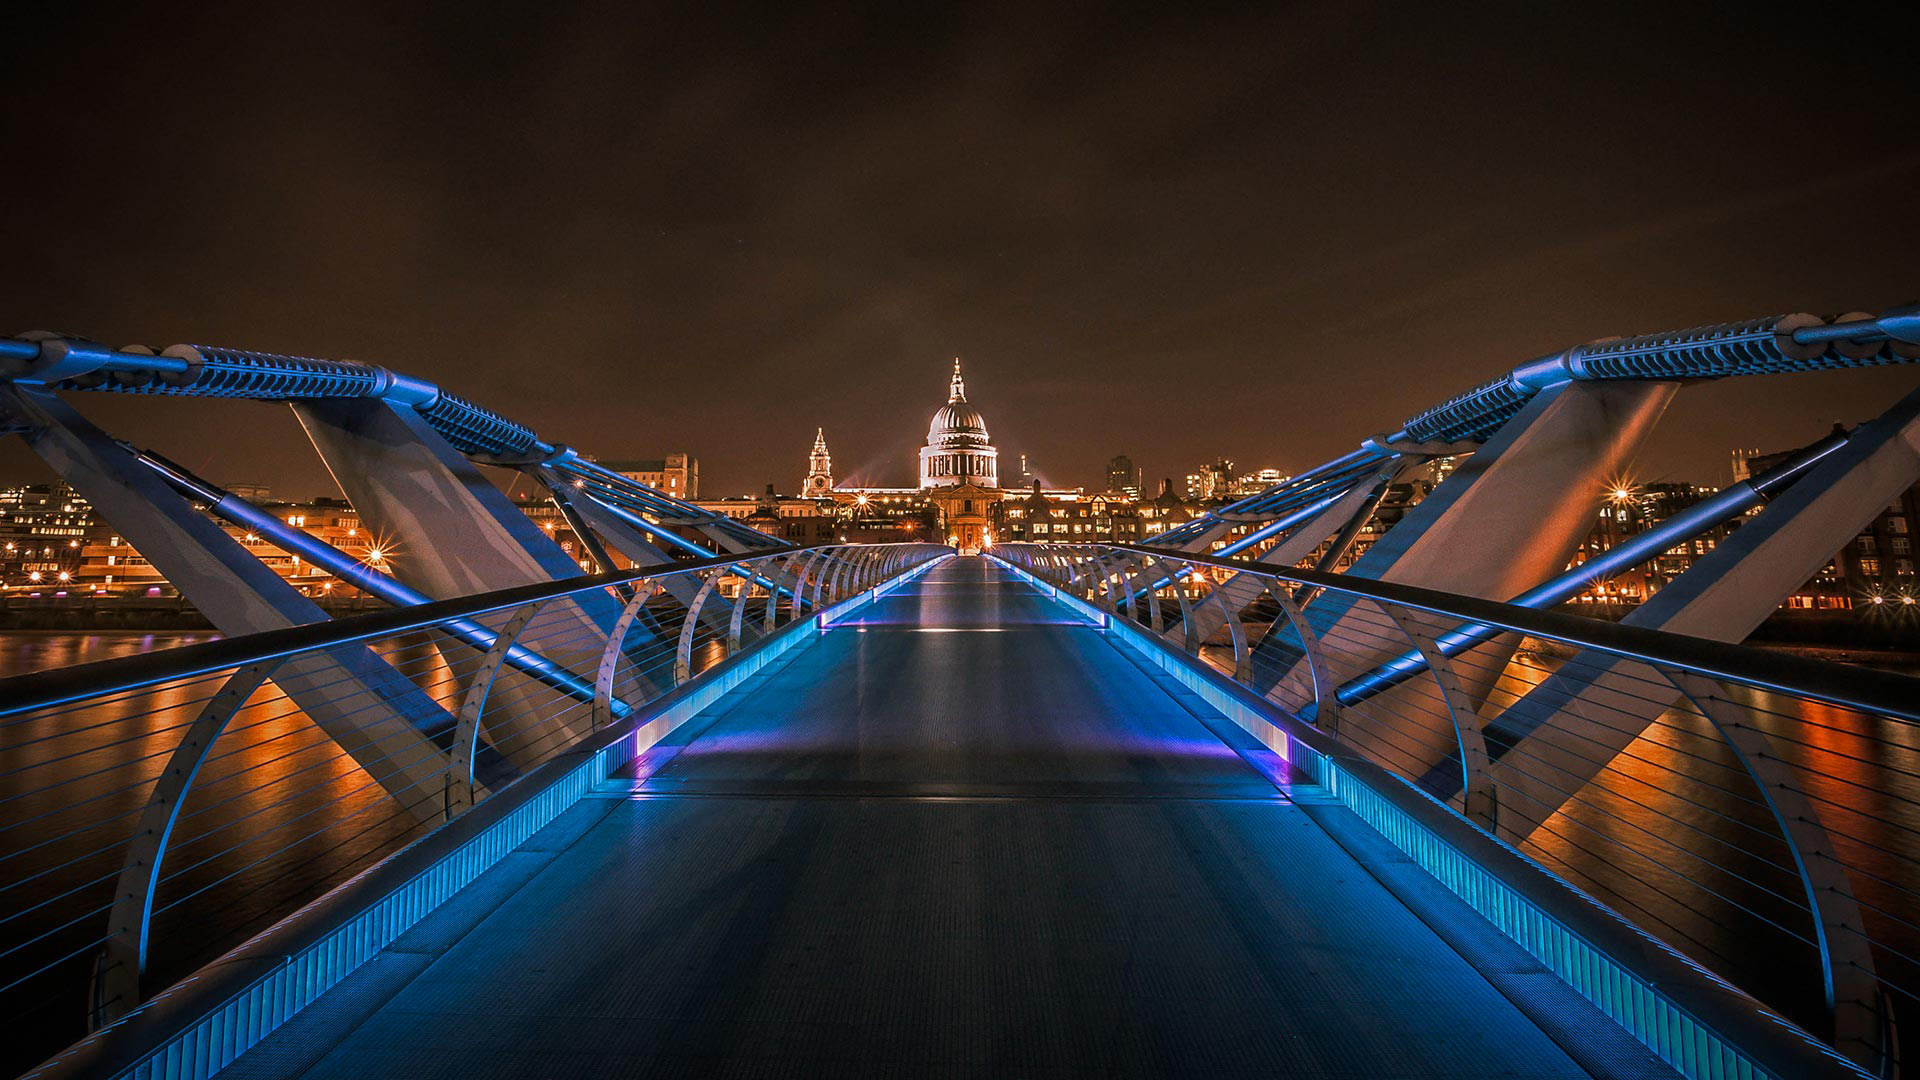 Millennium Bridge with St. Paul's Cathedral in the background, London, England - Scott Baldock/Getty Images)